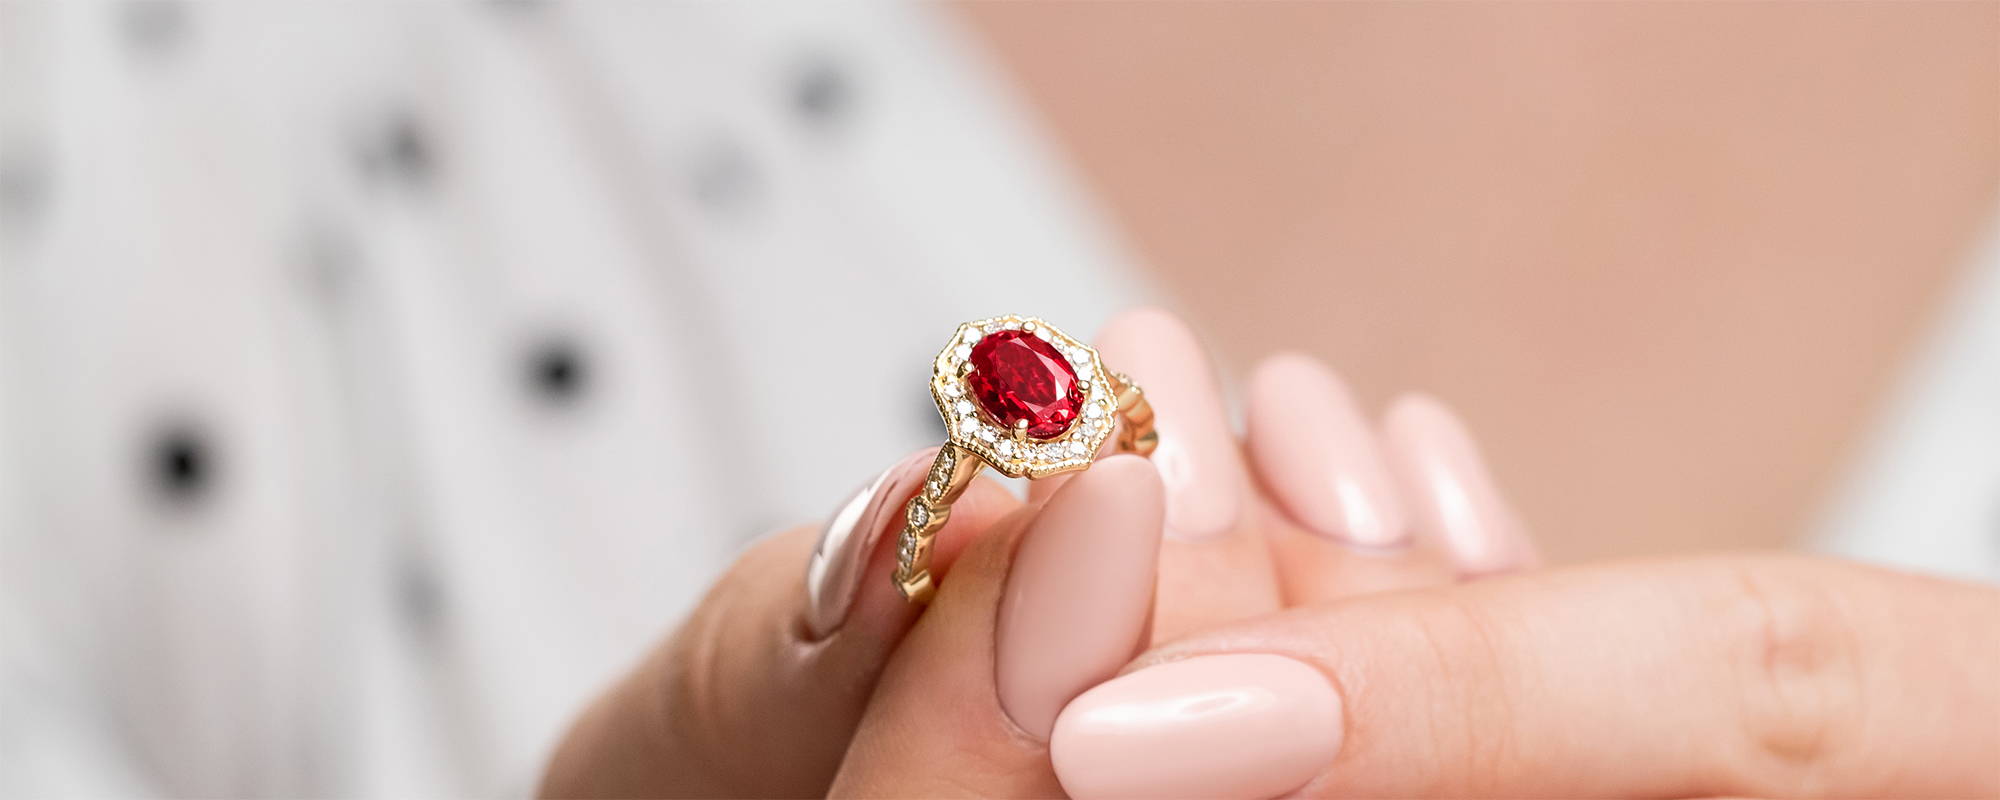 Top 5 Reasons to Propose with a Ruby Engagement Ring